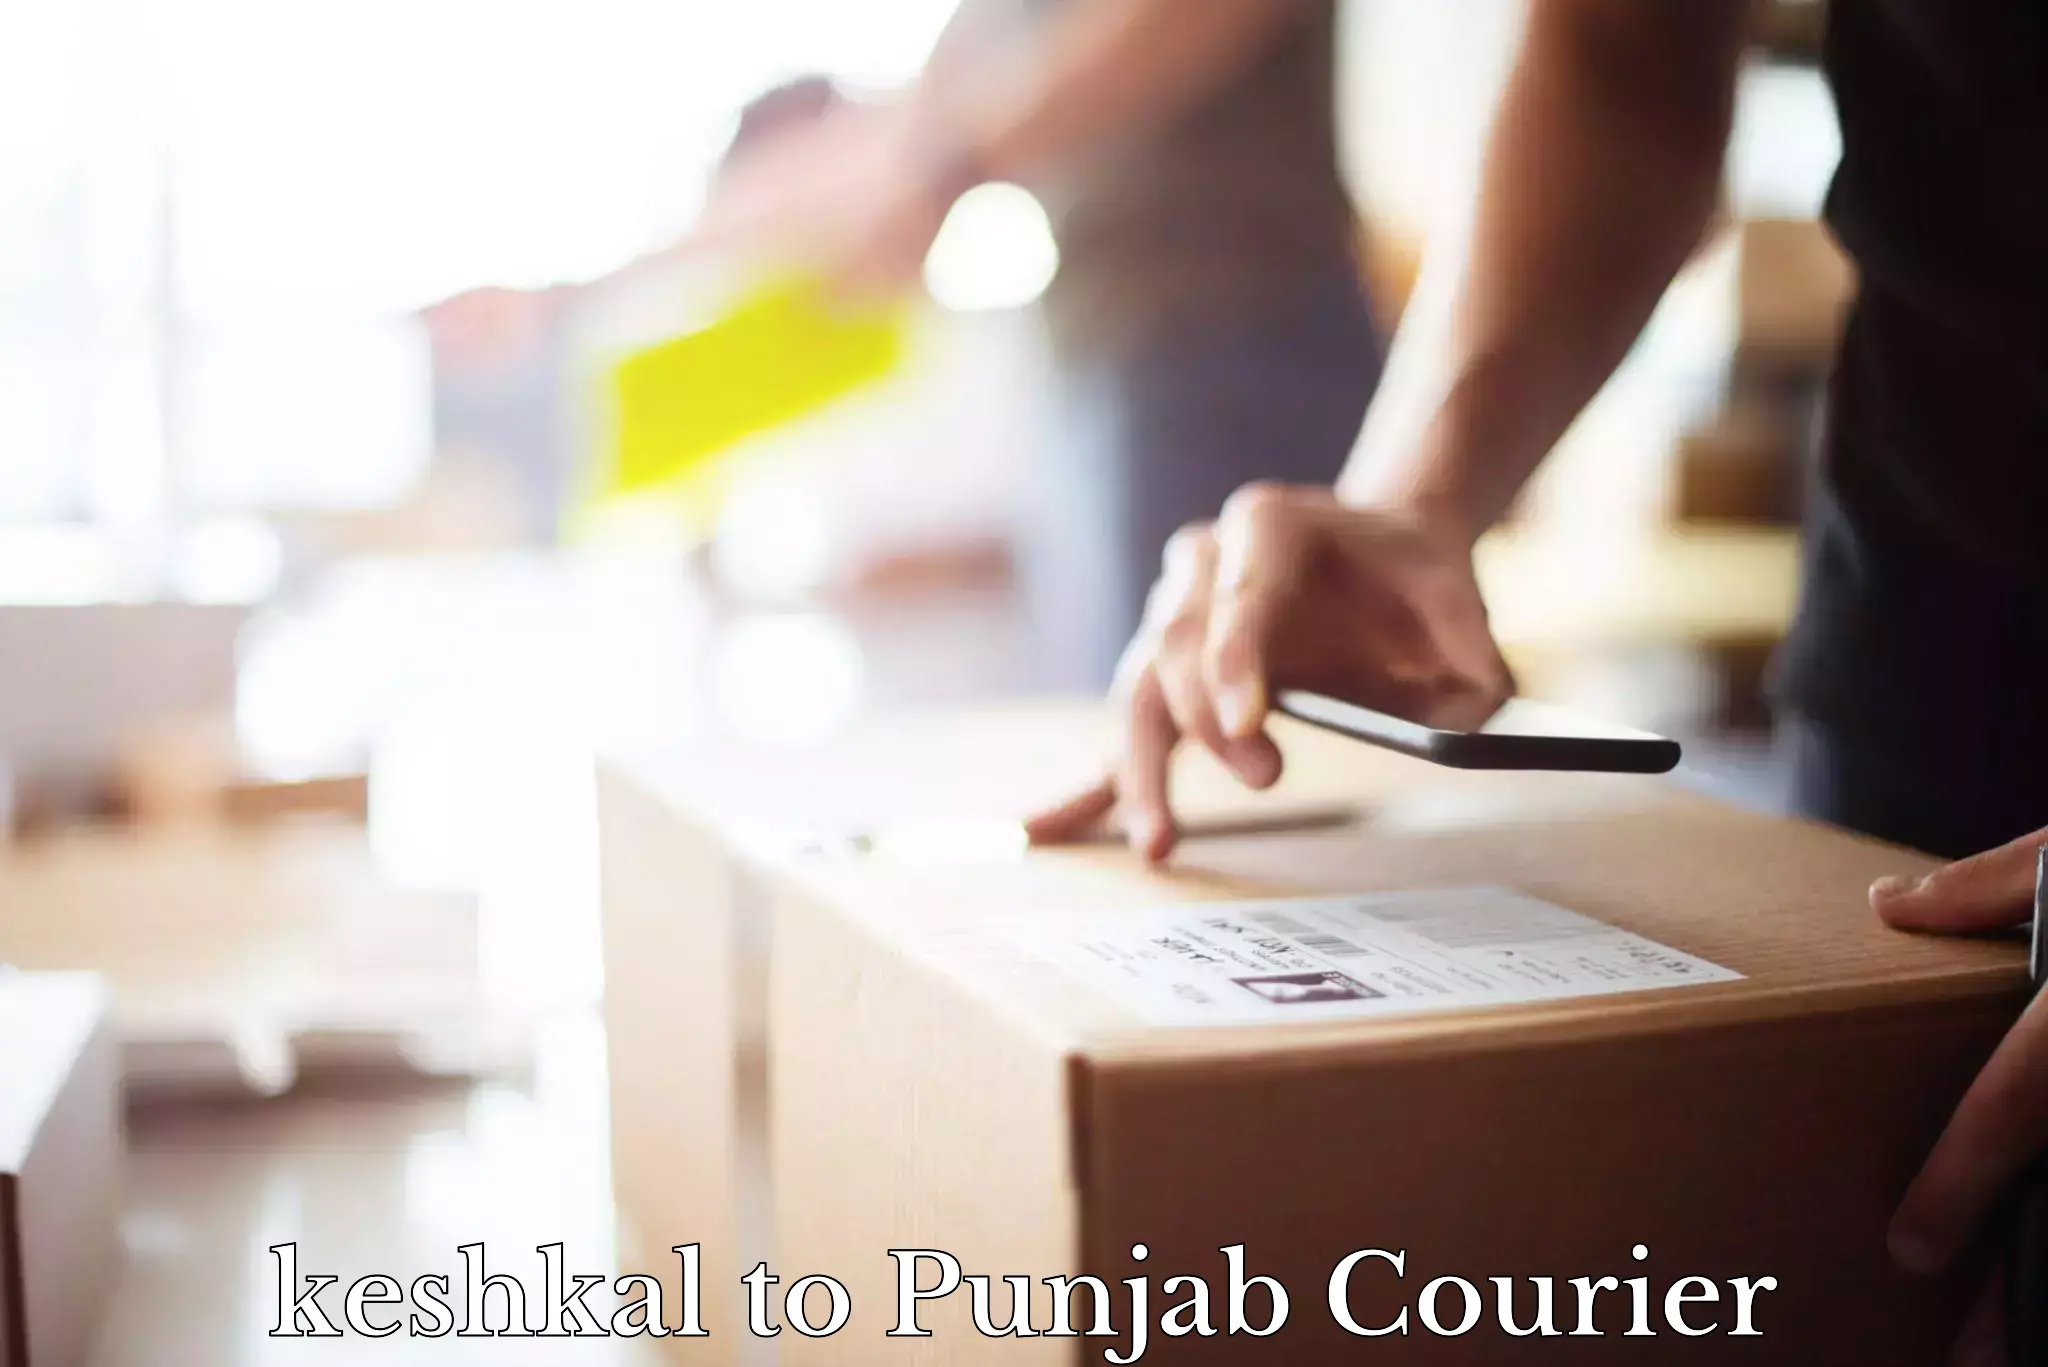 Customizable delivery plans in keshkal to Ludhiana